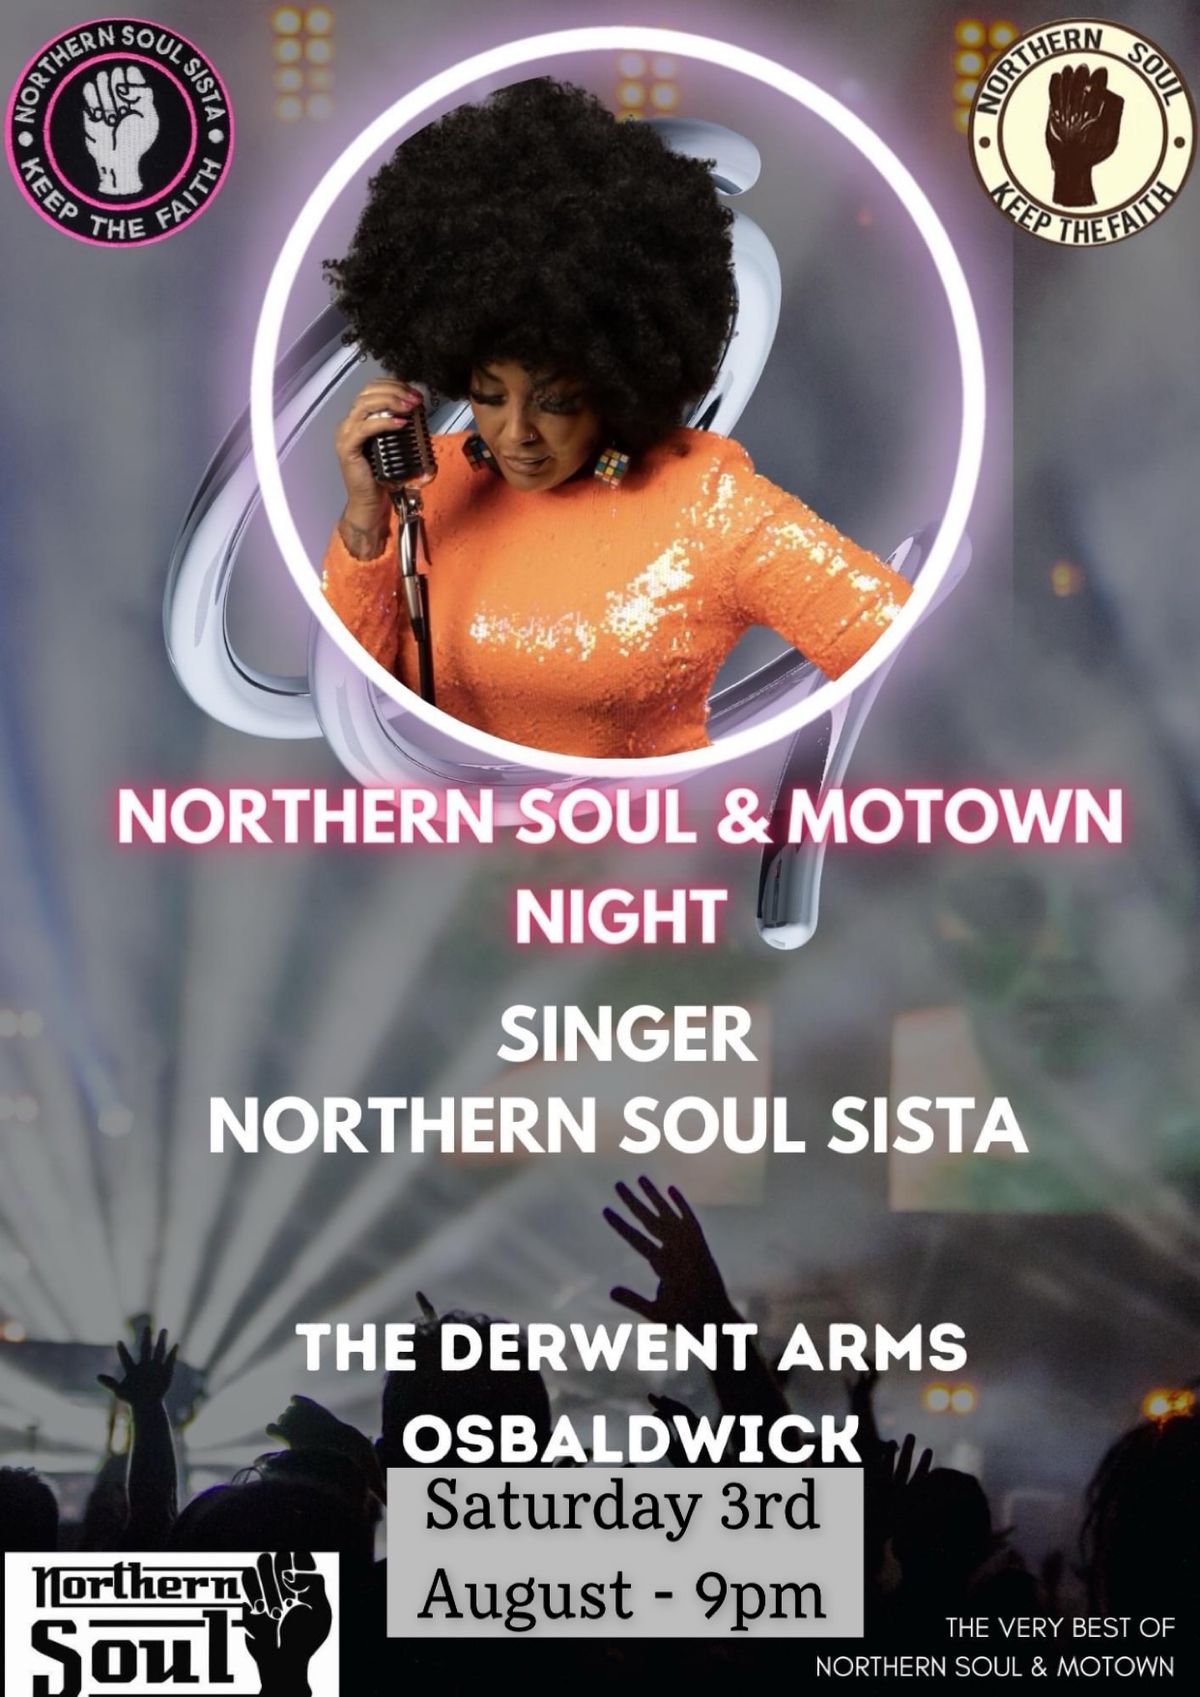 Northern soul & Motown night with Northern Soul Sista